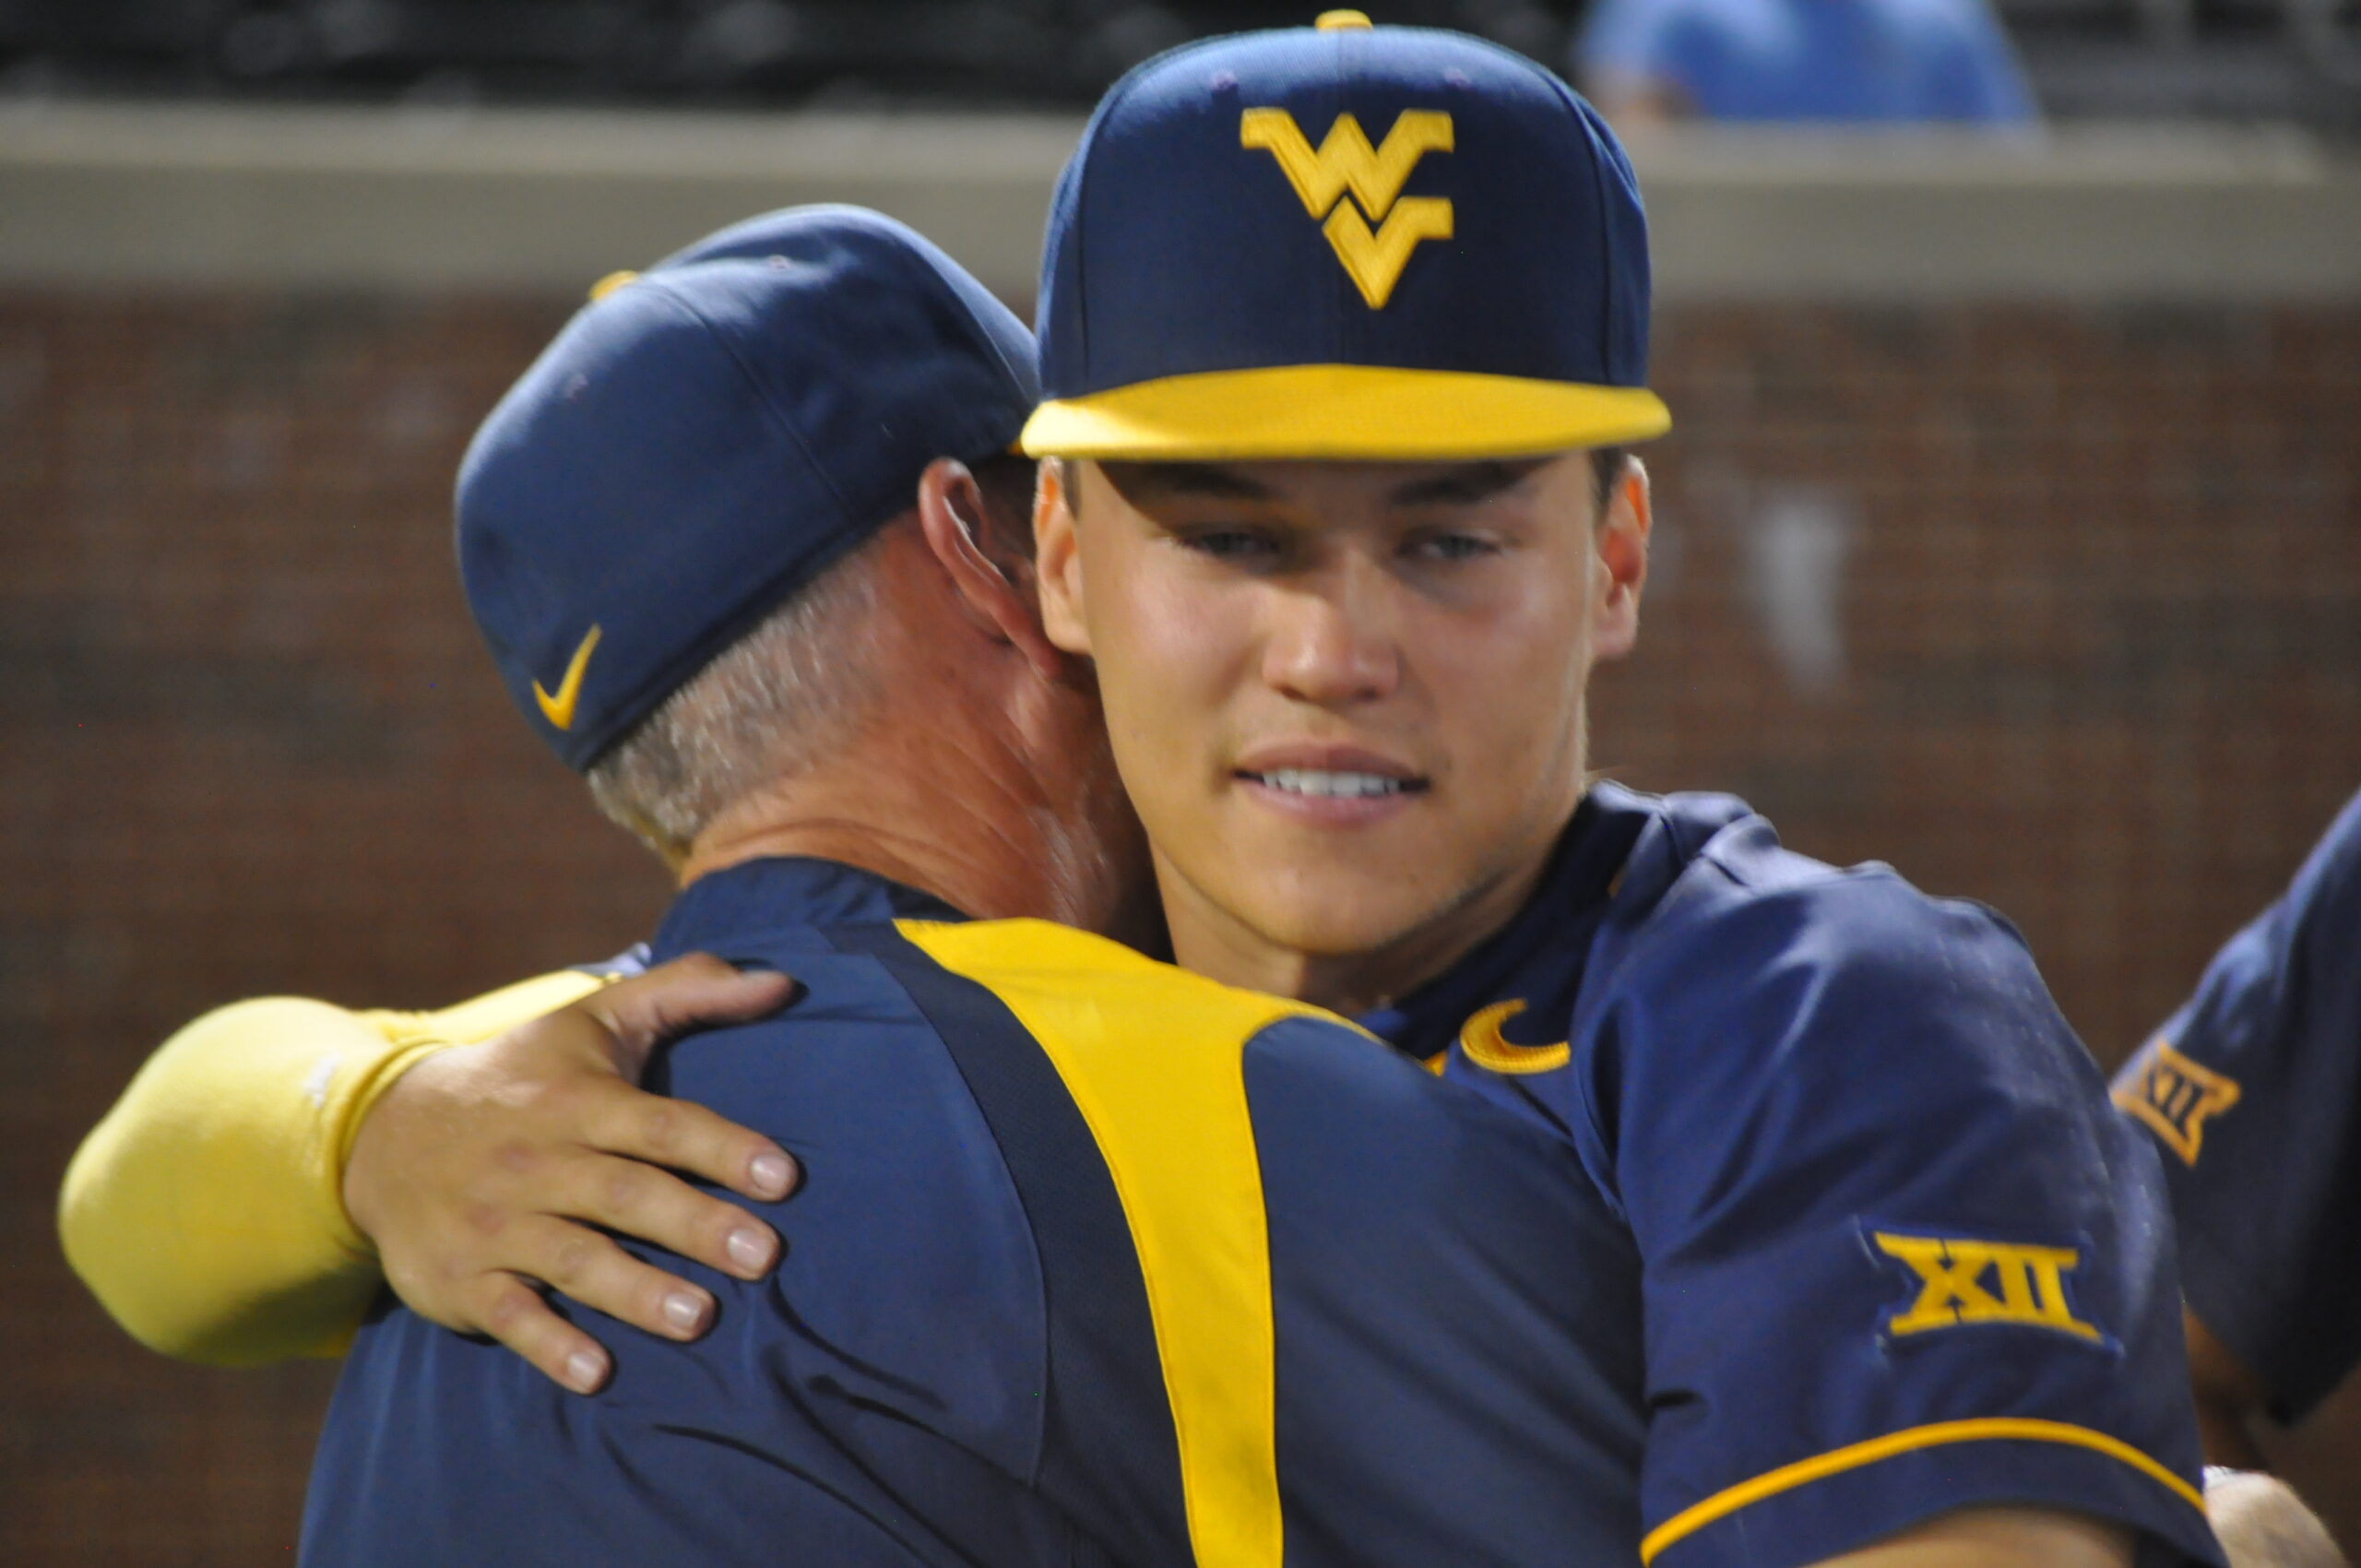 End of an era: West Virginia falls 2-1 to Tar Heels in Mazey's final game as head coach – WV MetroNews